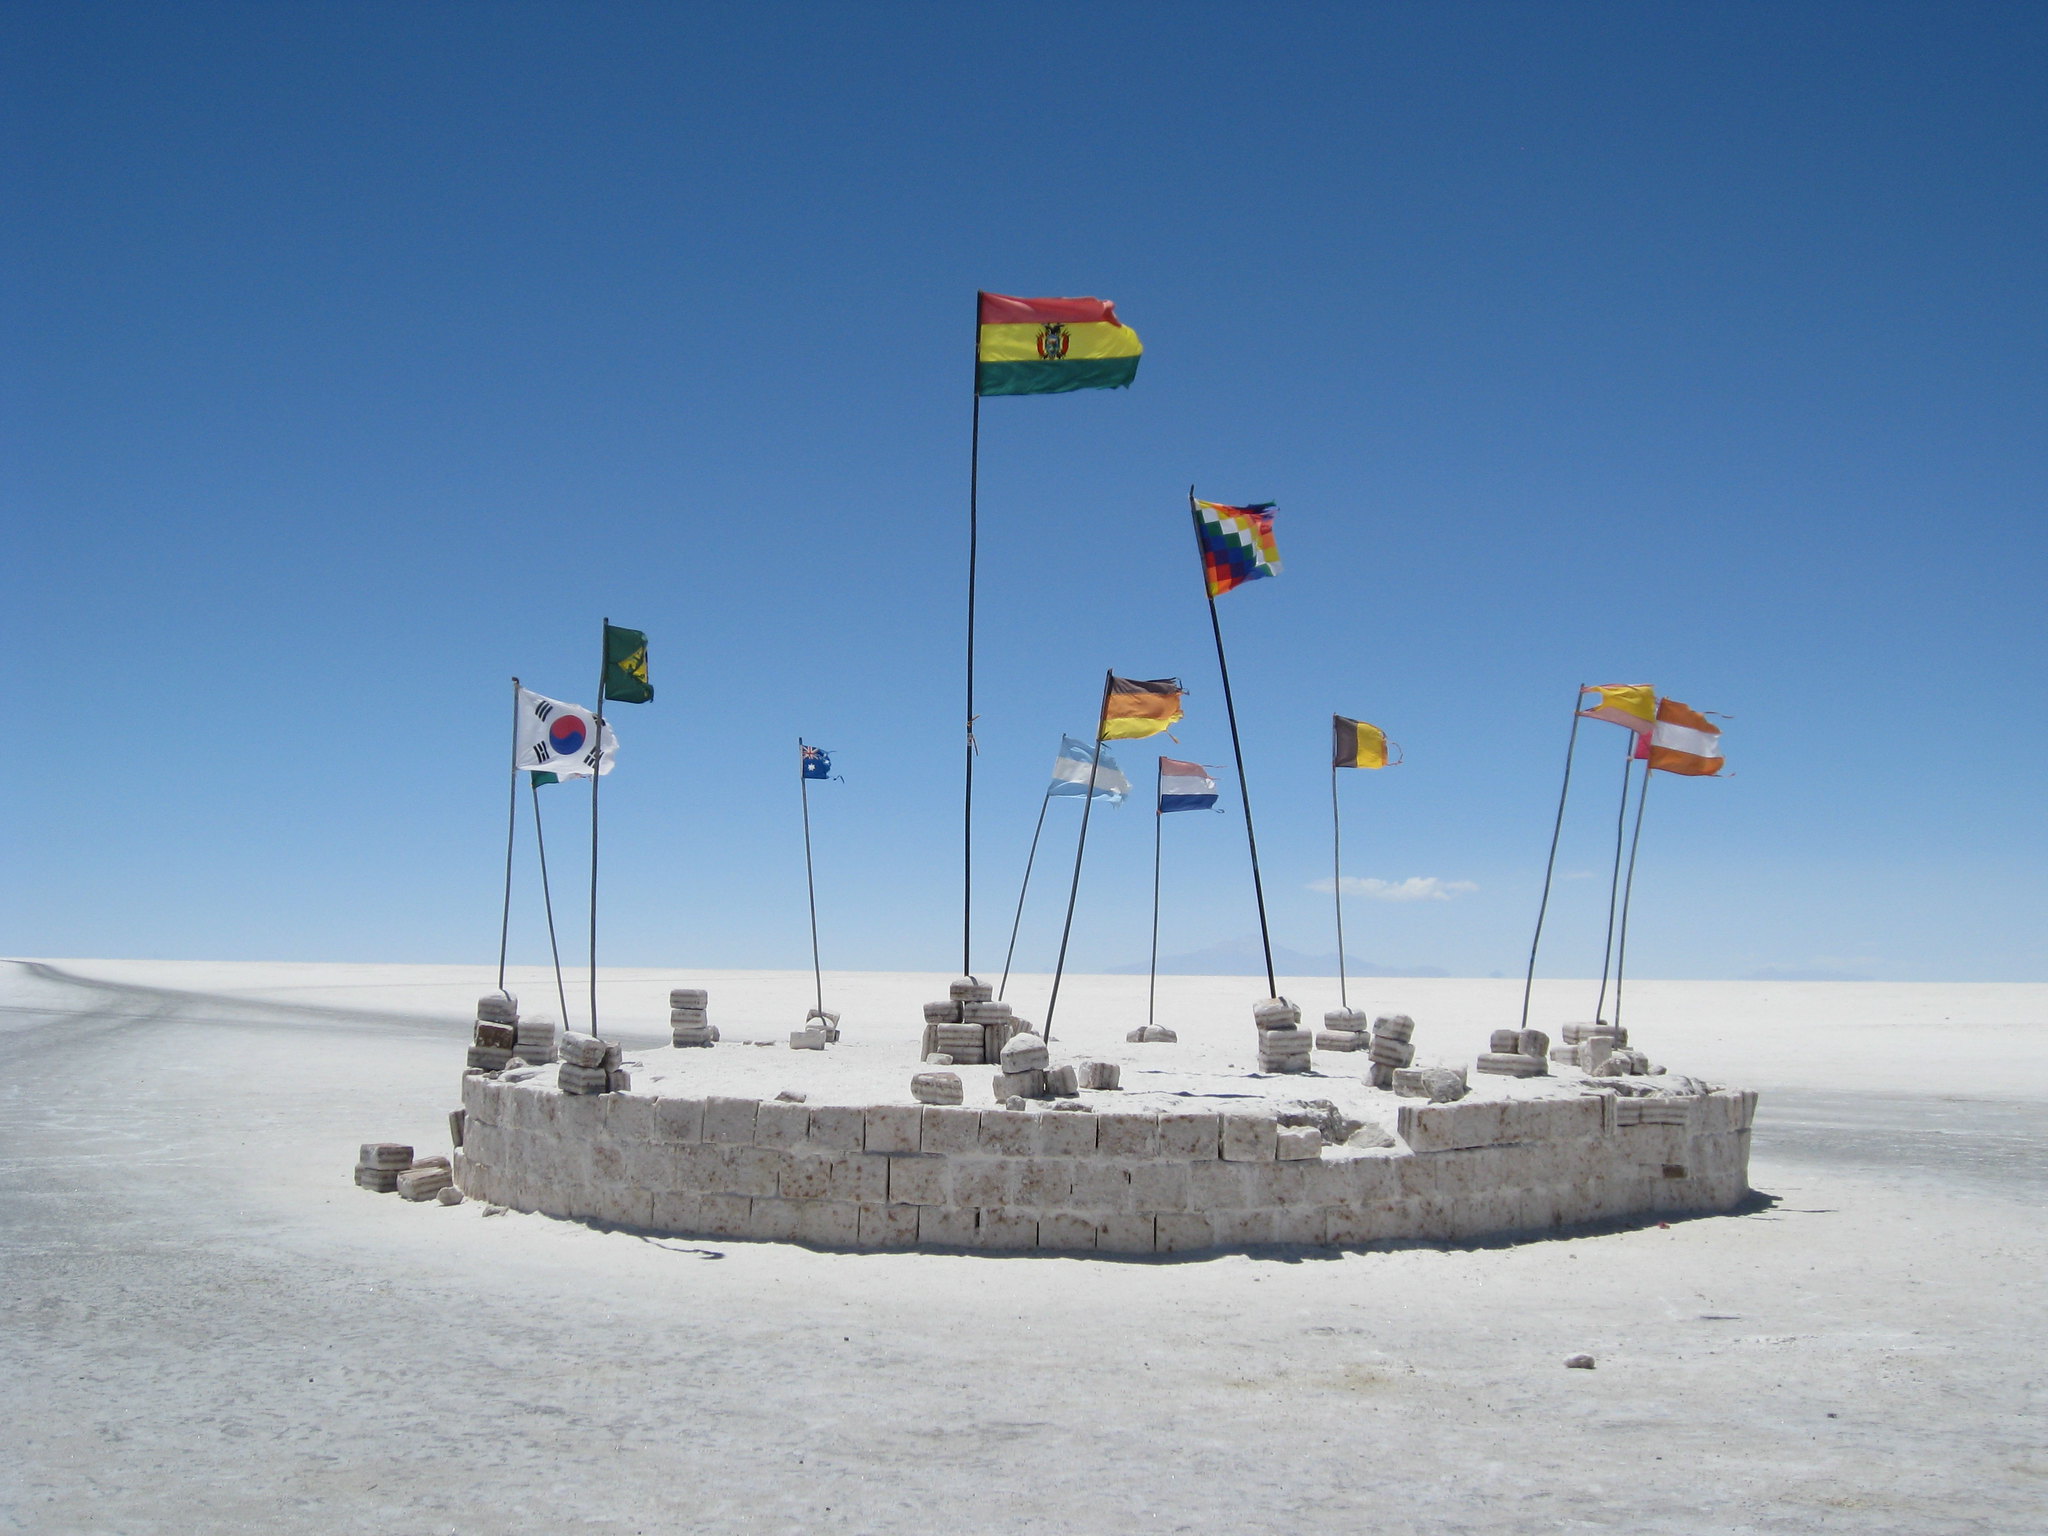 My Bolivia Journey - myths broken and new discoveries @BolTurOficial